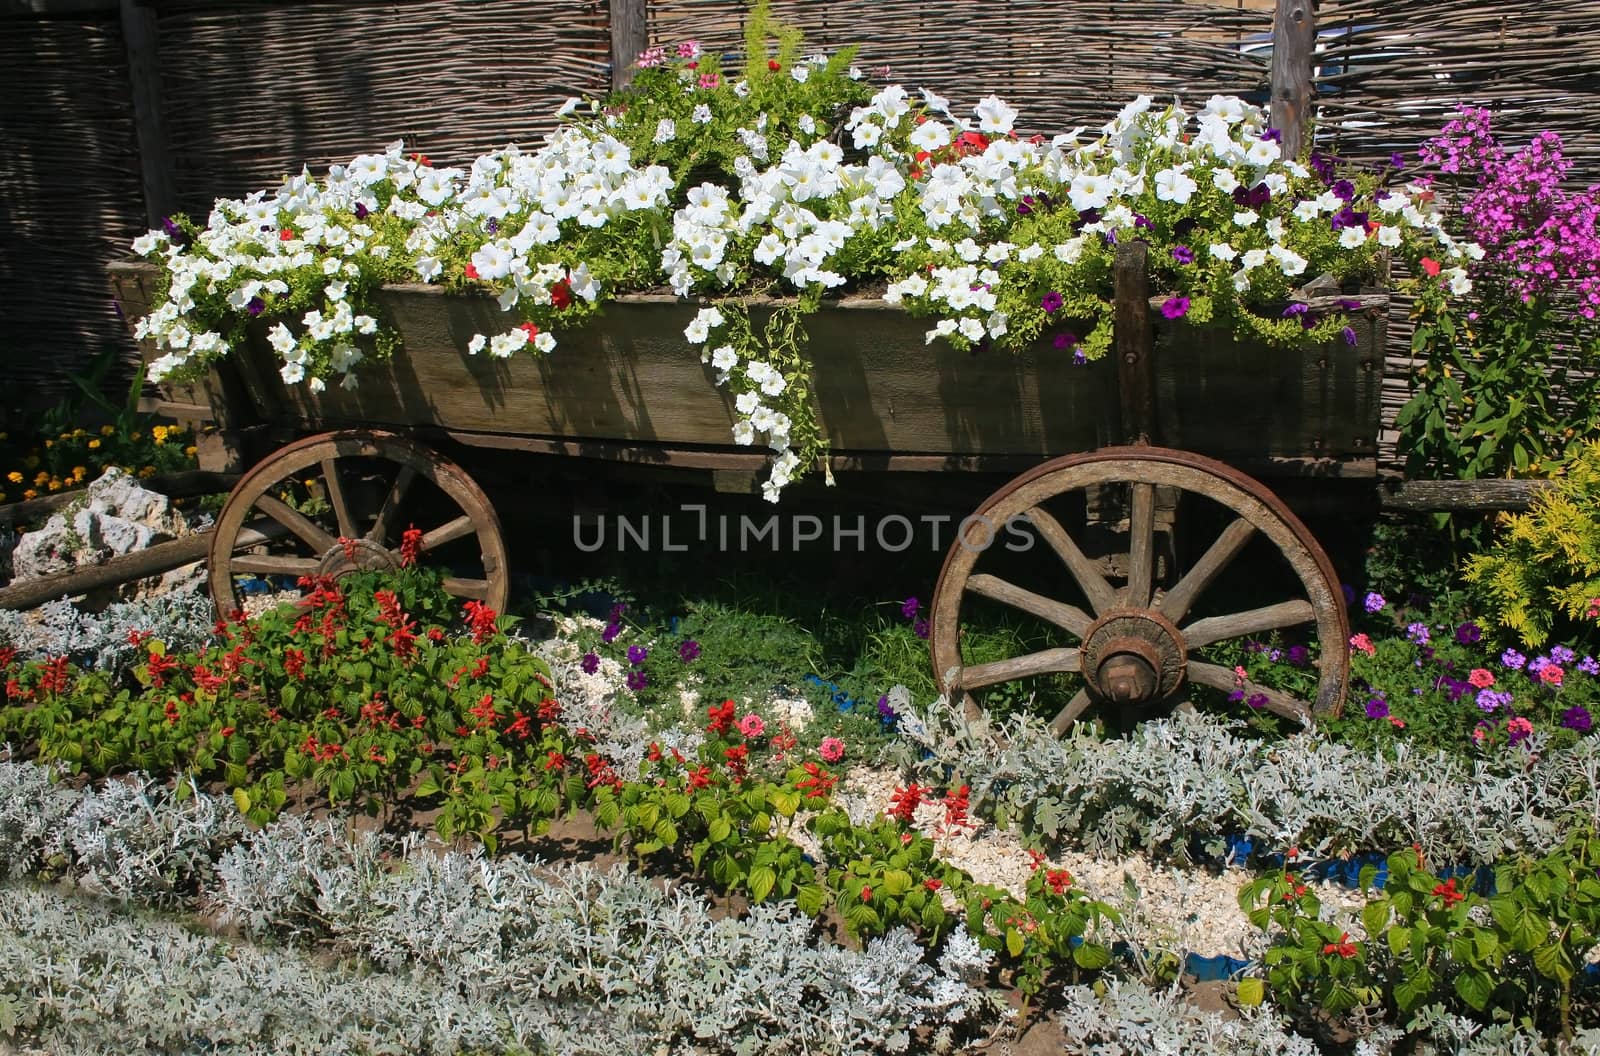 Bed  in the form of  cart filled with flowers